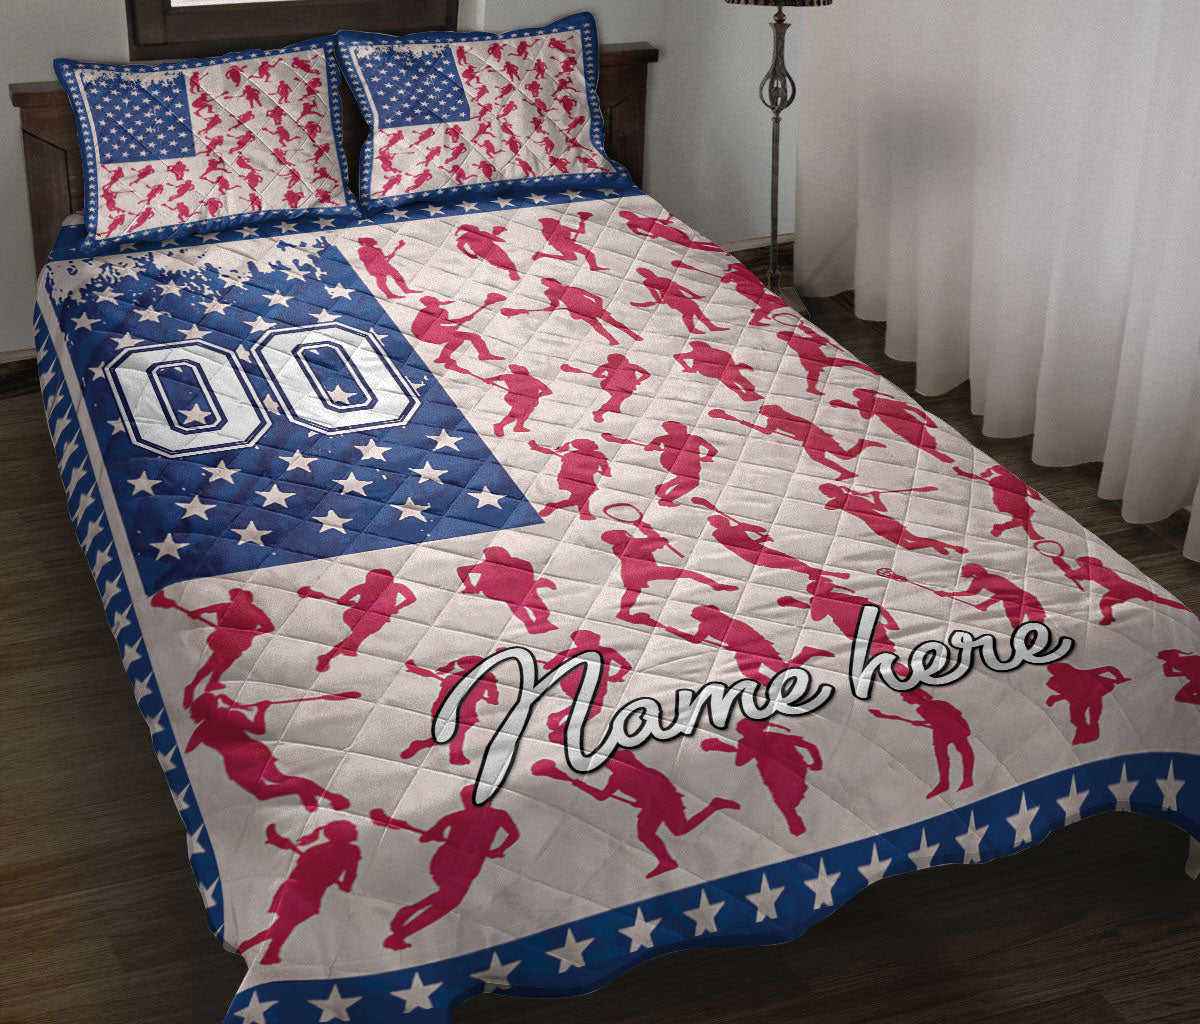 Ohaprints-Quilt-Bed-Set-Pillowcase-Lacrosse-Girl-Player-Fan-Gift-Posing-Us-Flag-Custom-Personalized-Name-Number-Blanket-Bedspread-Bedding-1423-Throw (55'' x 60'')